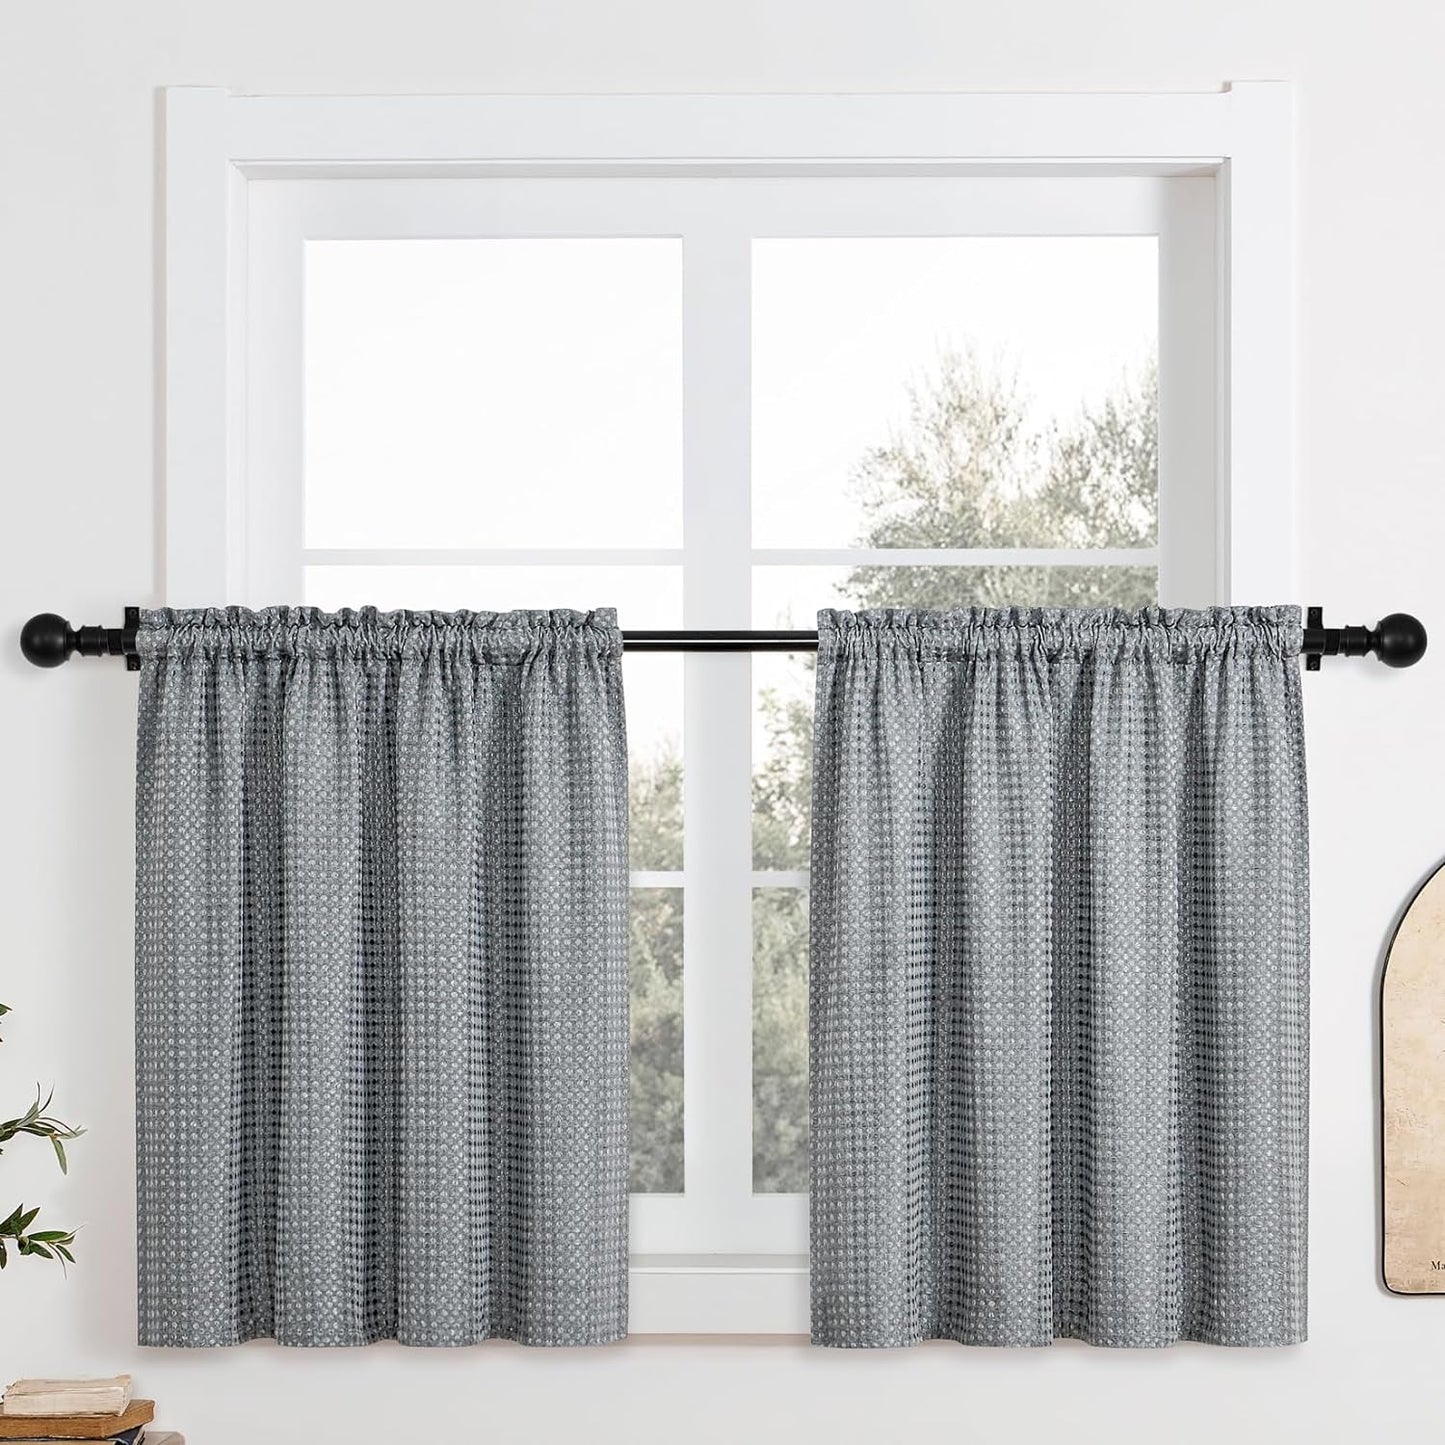 Home Queen White Water Resistant Bathroom Window Curtain, Waffle Textured Half Tier Curtains for Kitchen Cafe, 36" W X 36" L Inches, Set of 2